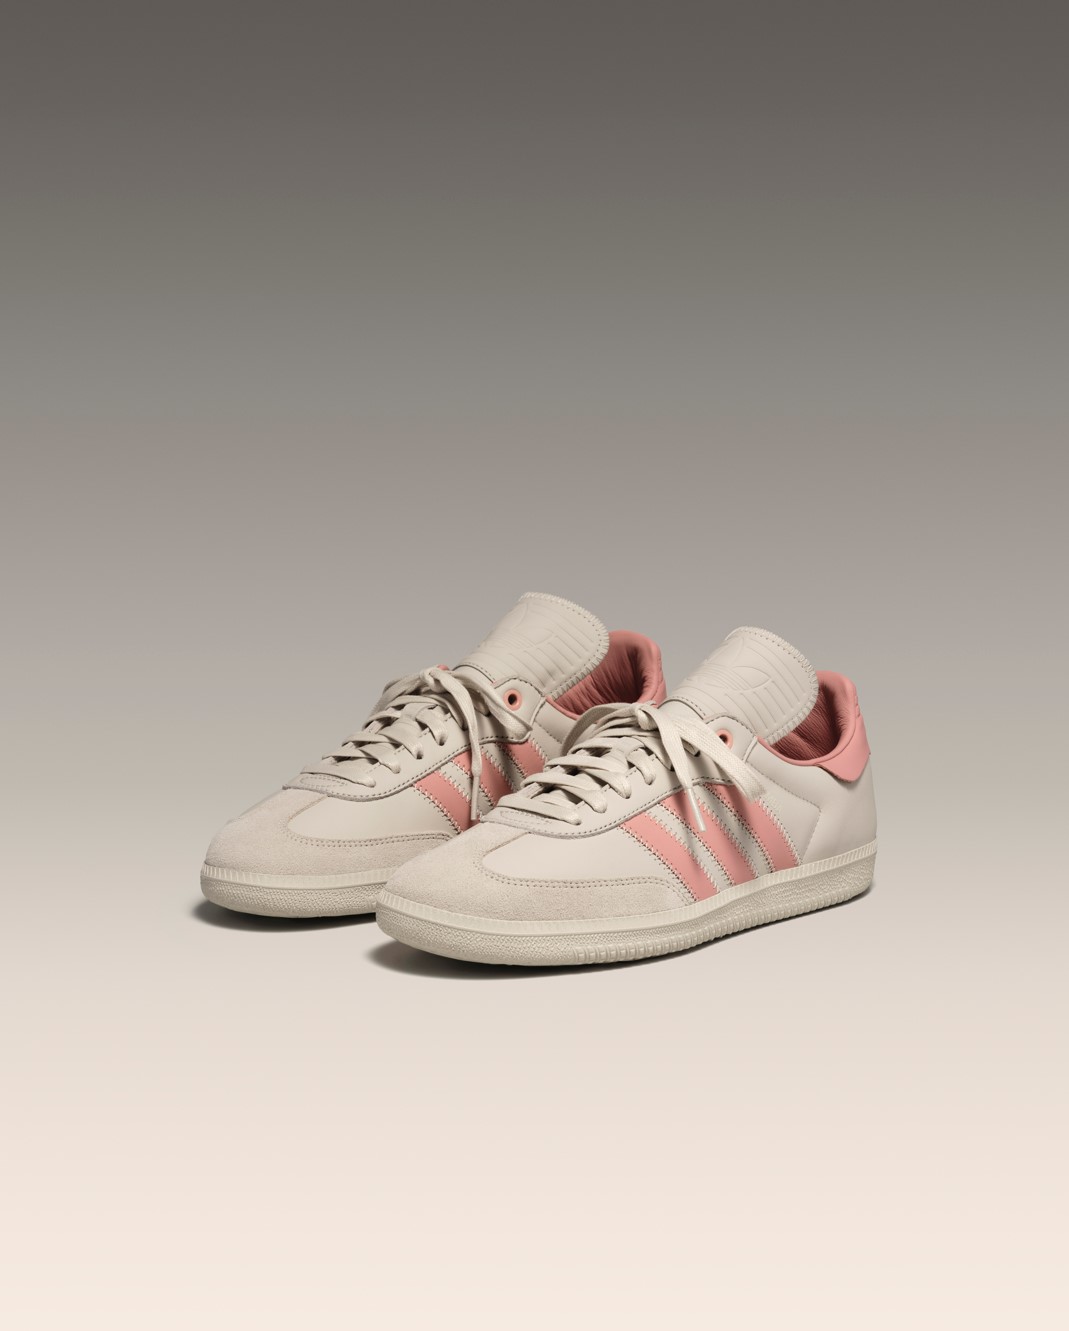 Adidas and Humanrace Continue Their Collaboration with a New Perspective on the Samba, Sneakerize.gr